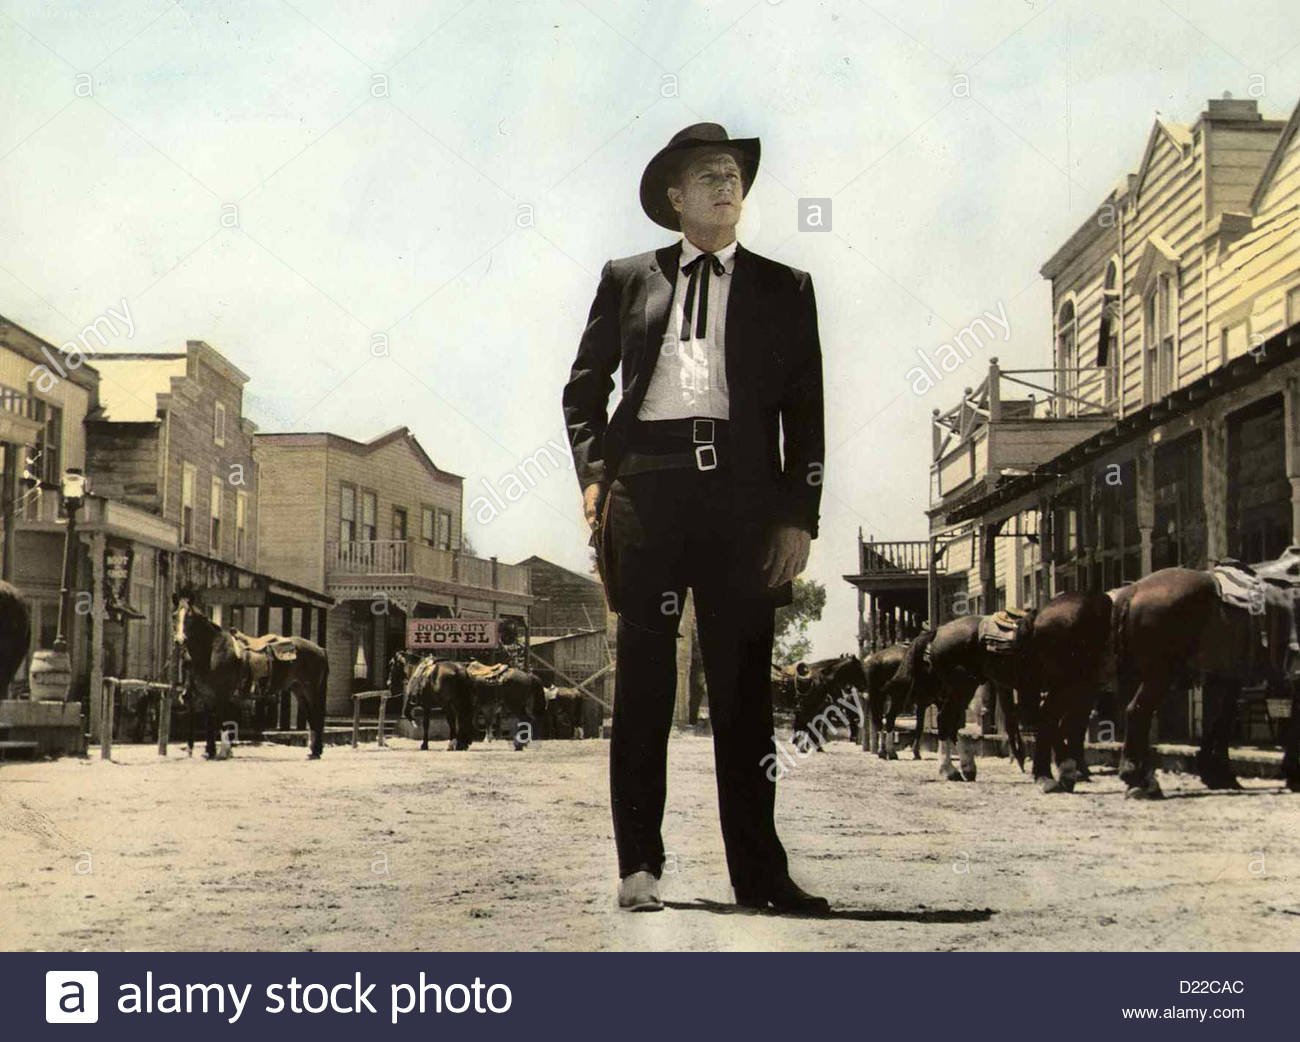 Amazing Dodge City Pictures & Backgrounds